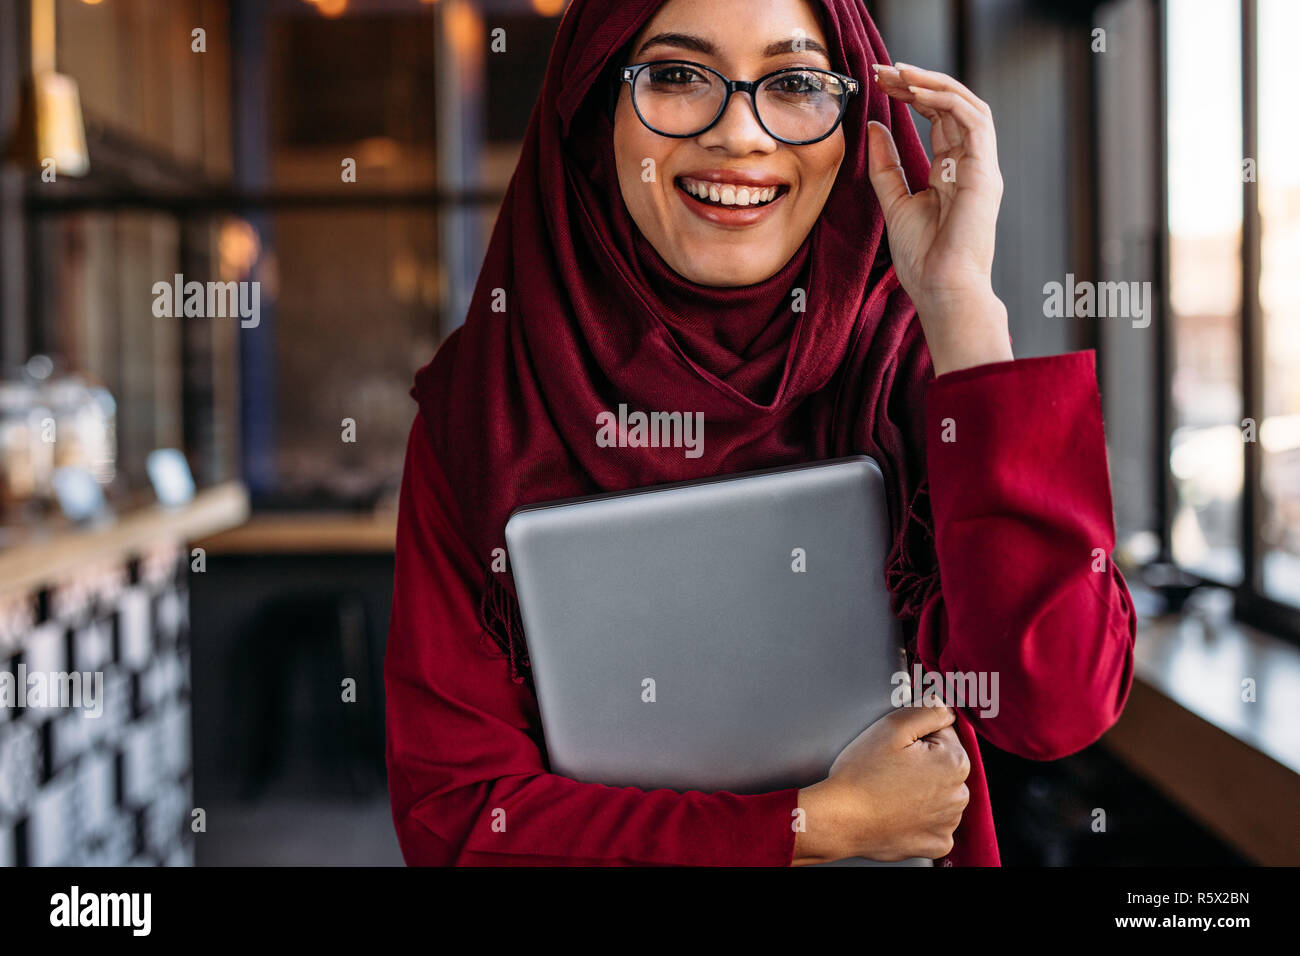 Beautiful muslim woman with laptop in hand adjusting her eyeglasses at coffee shop. Female in hijab at coffee shop. Stock Photo